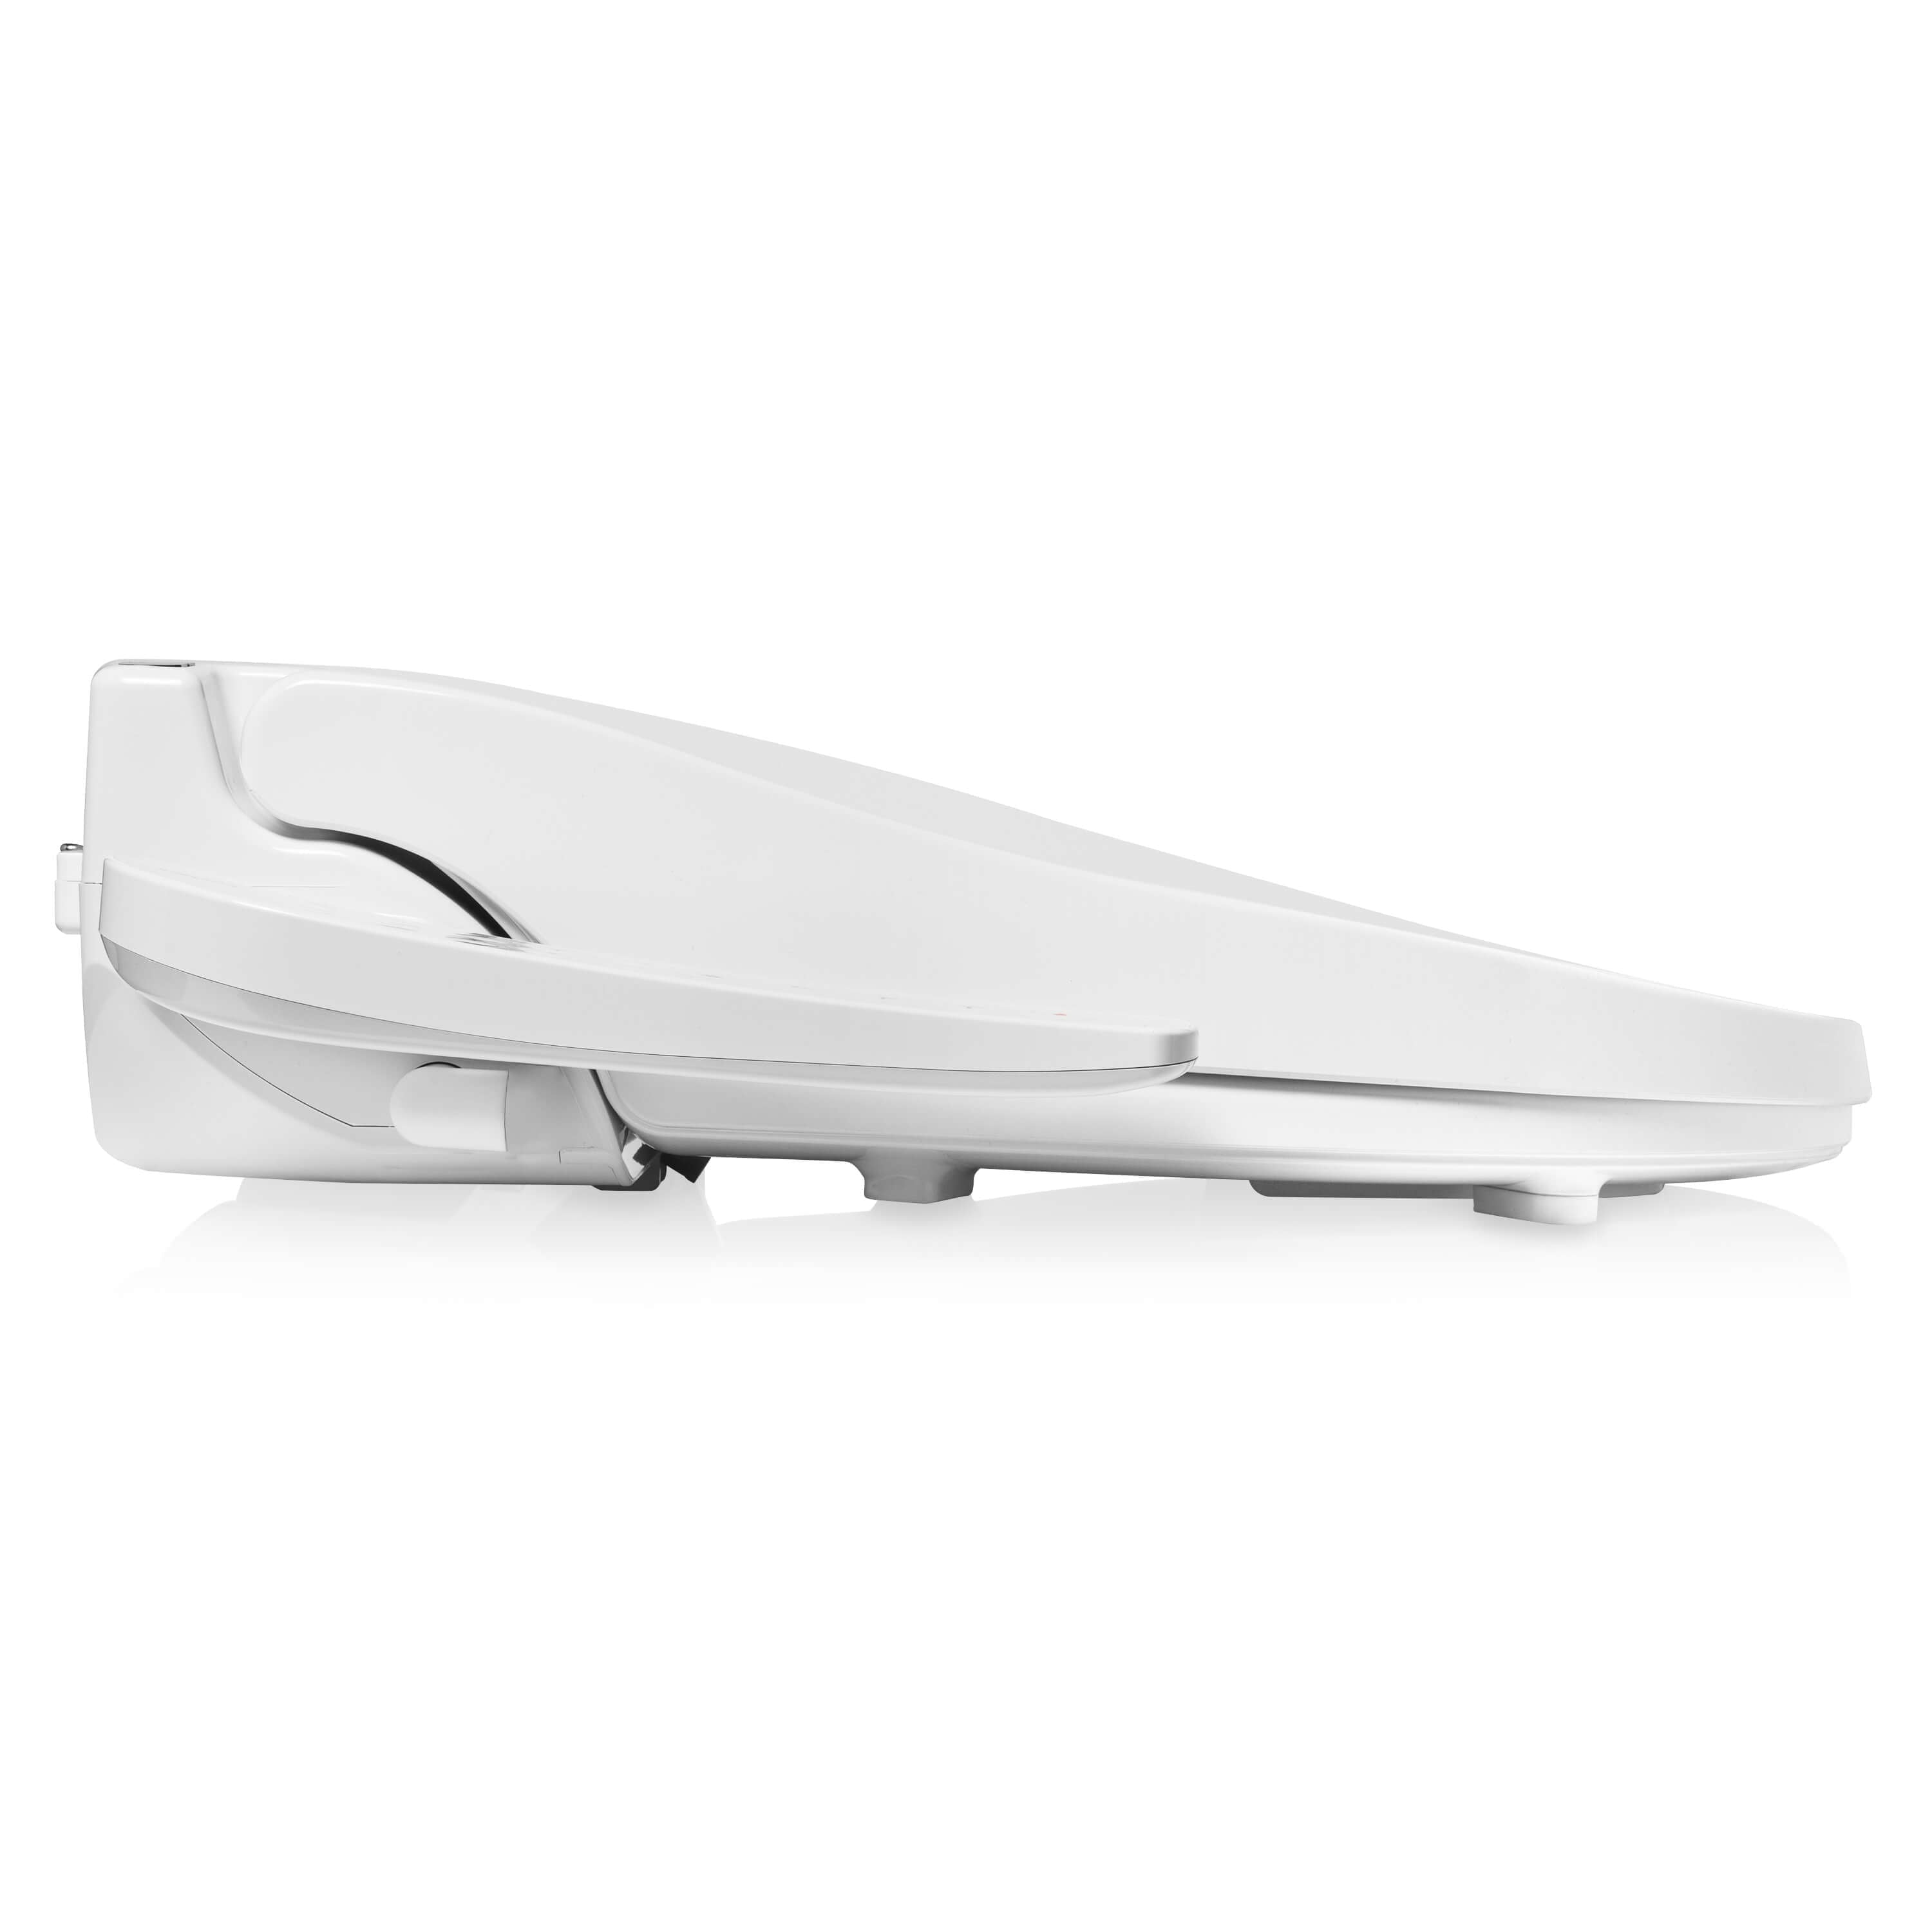 Brondell Swash Select DR801 Advanced Bidet Toilet Seat With Side Arm Controls